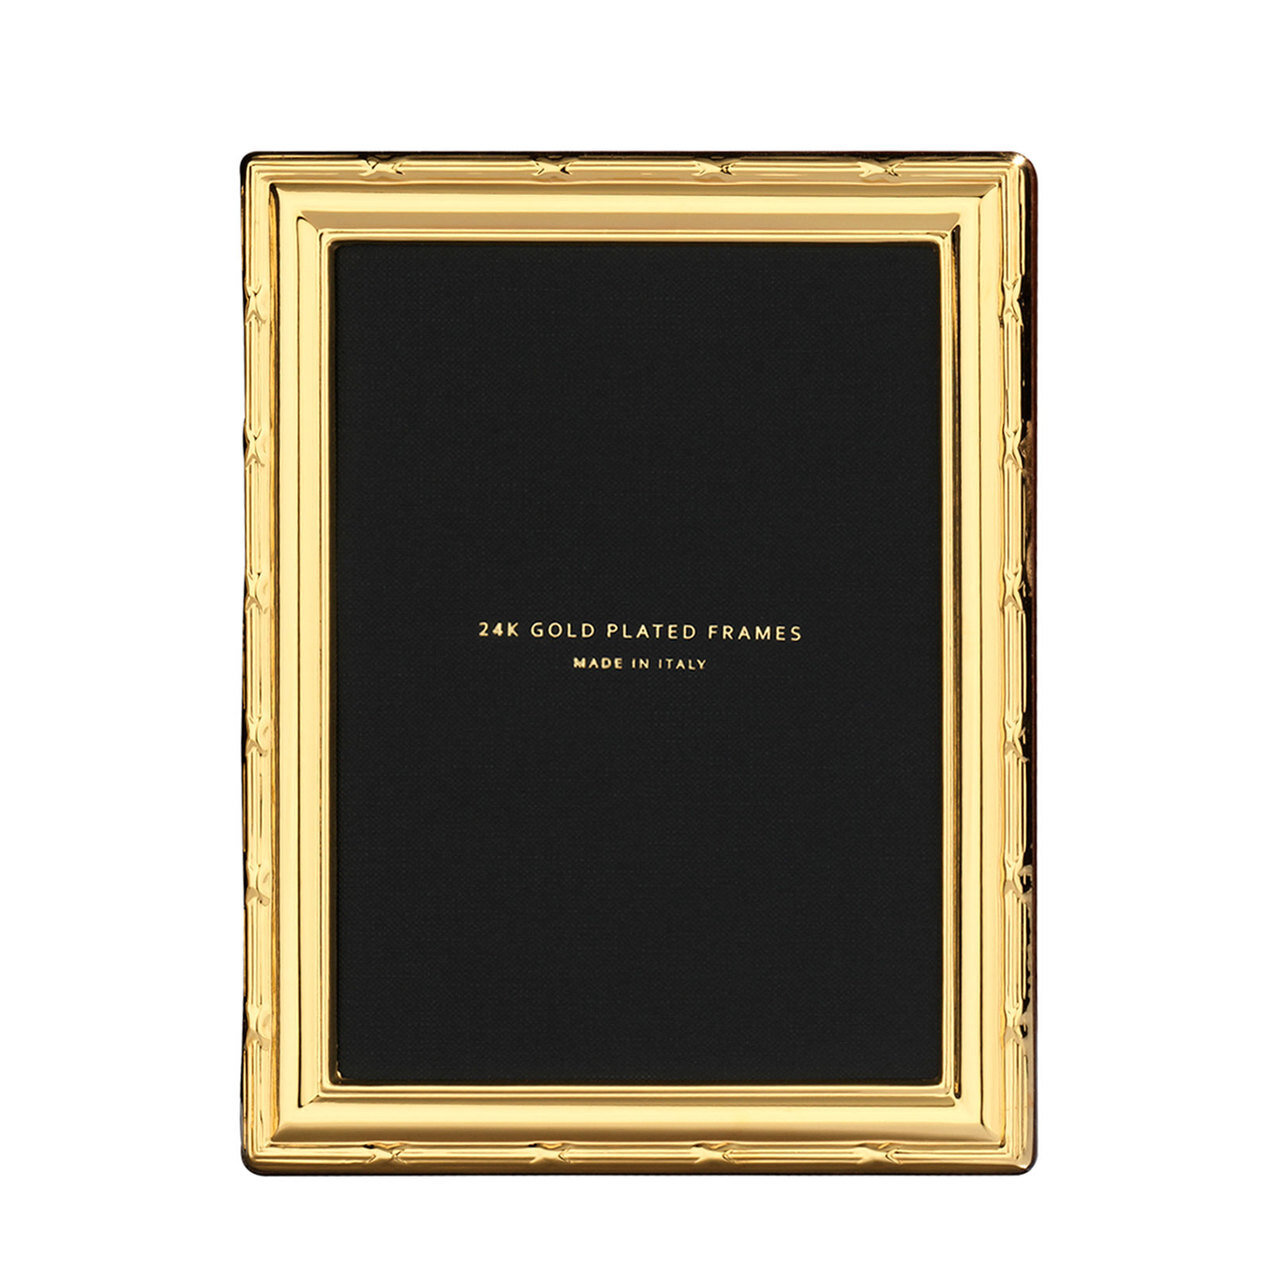 Cunill Ribbon 5 x 7 Inch Picture Frame - 24k Gold Plated 0.5 Microns